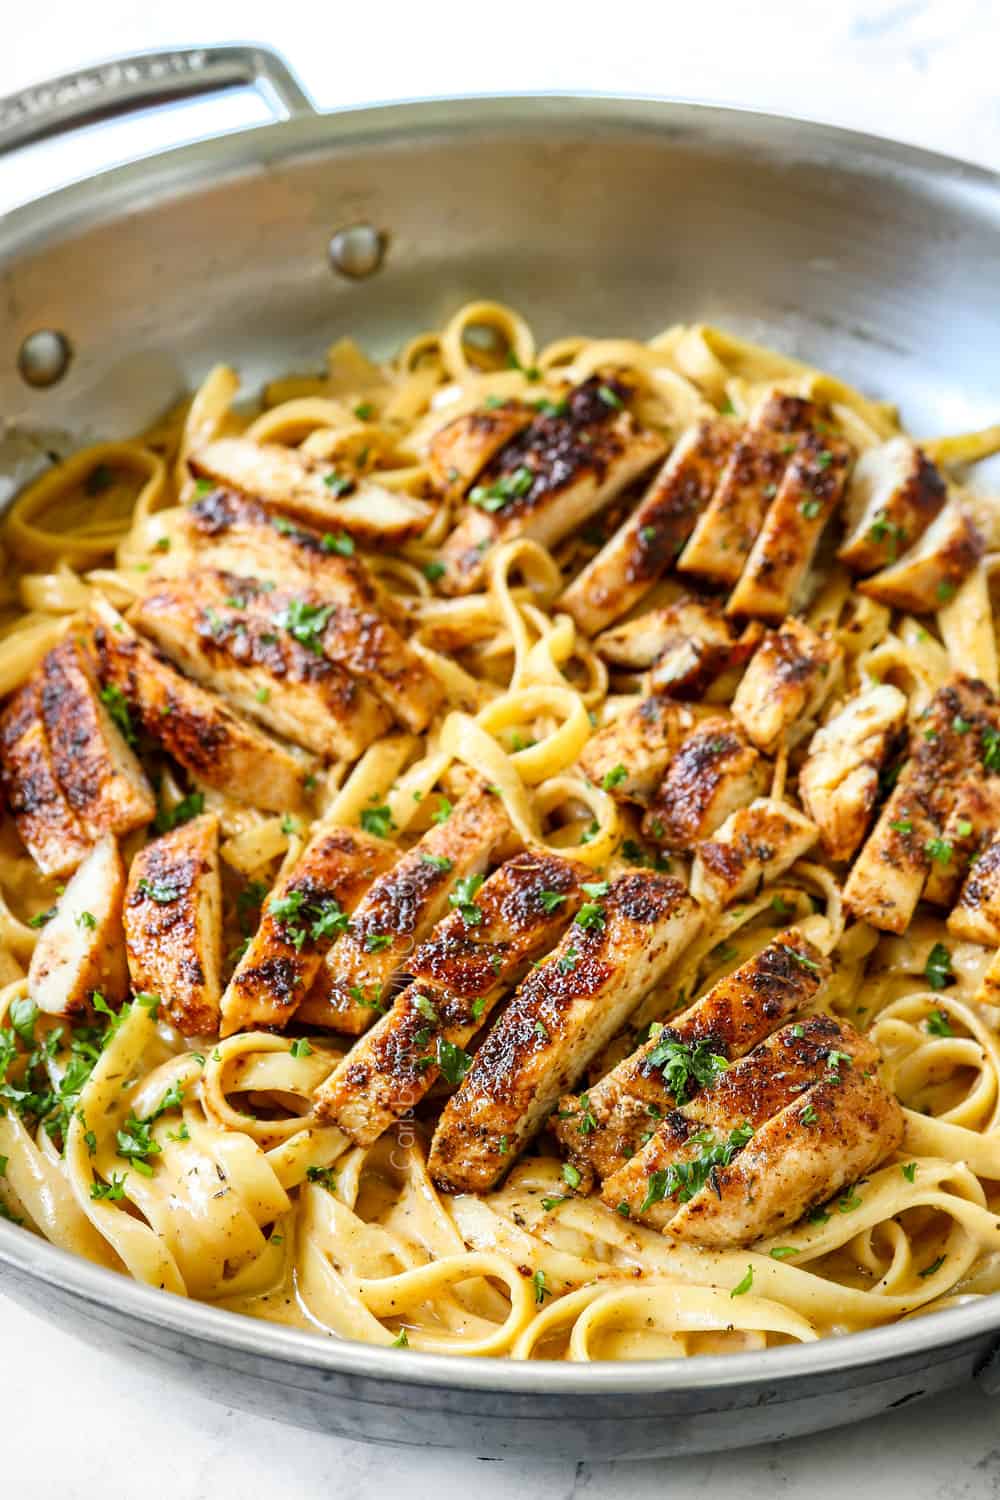 Blackened Chicken Alfredo in a skillet with sliced chicken breasts showing how juicy the chicken is